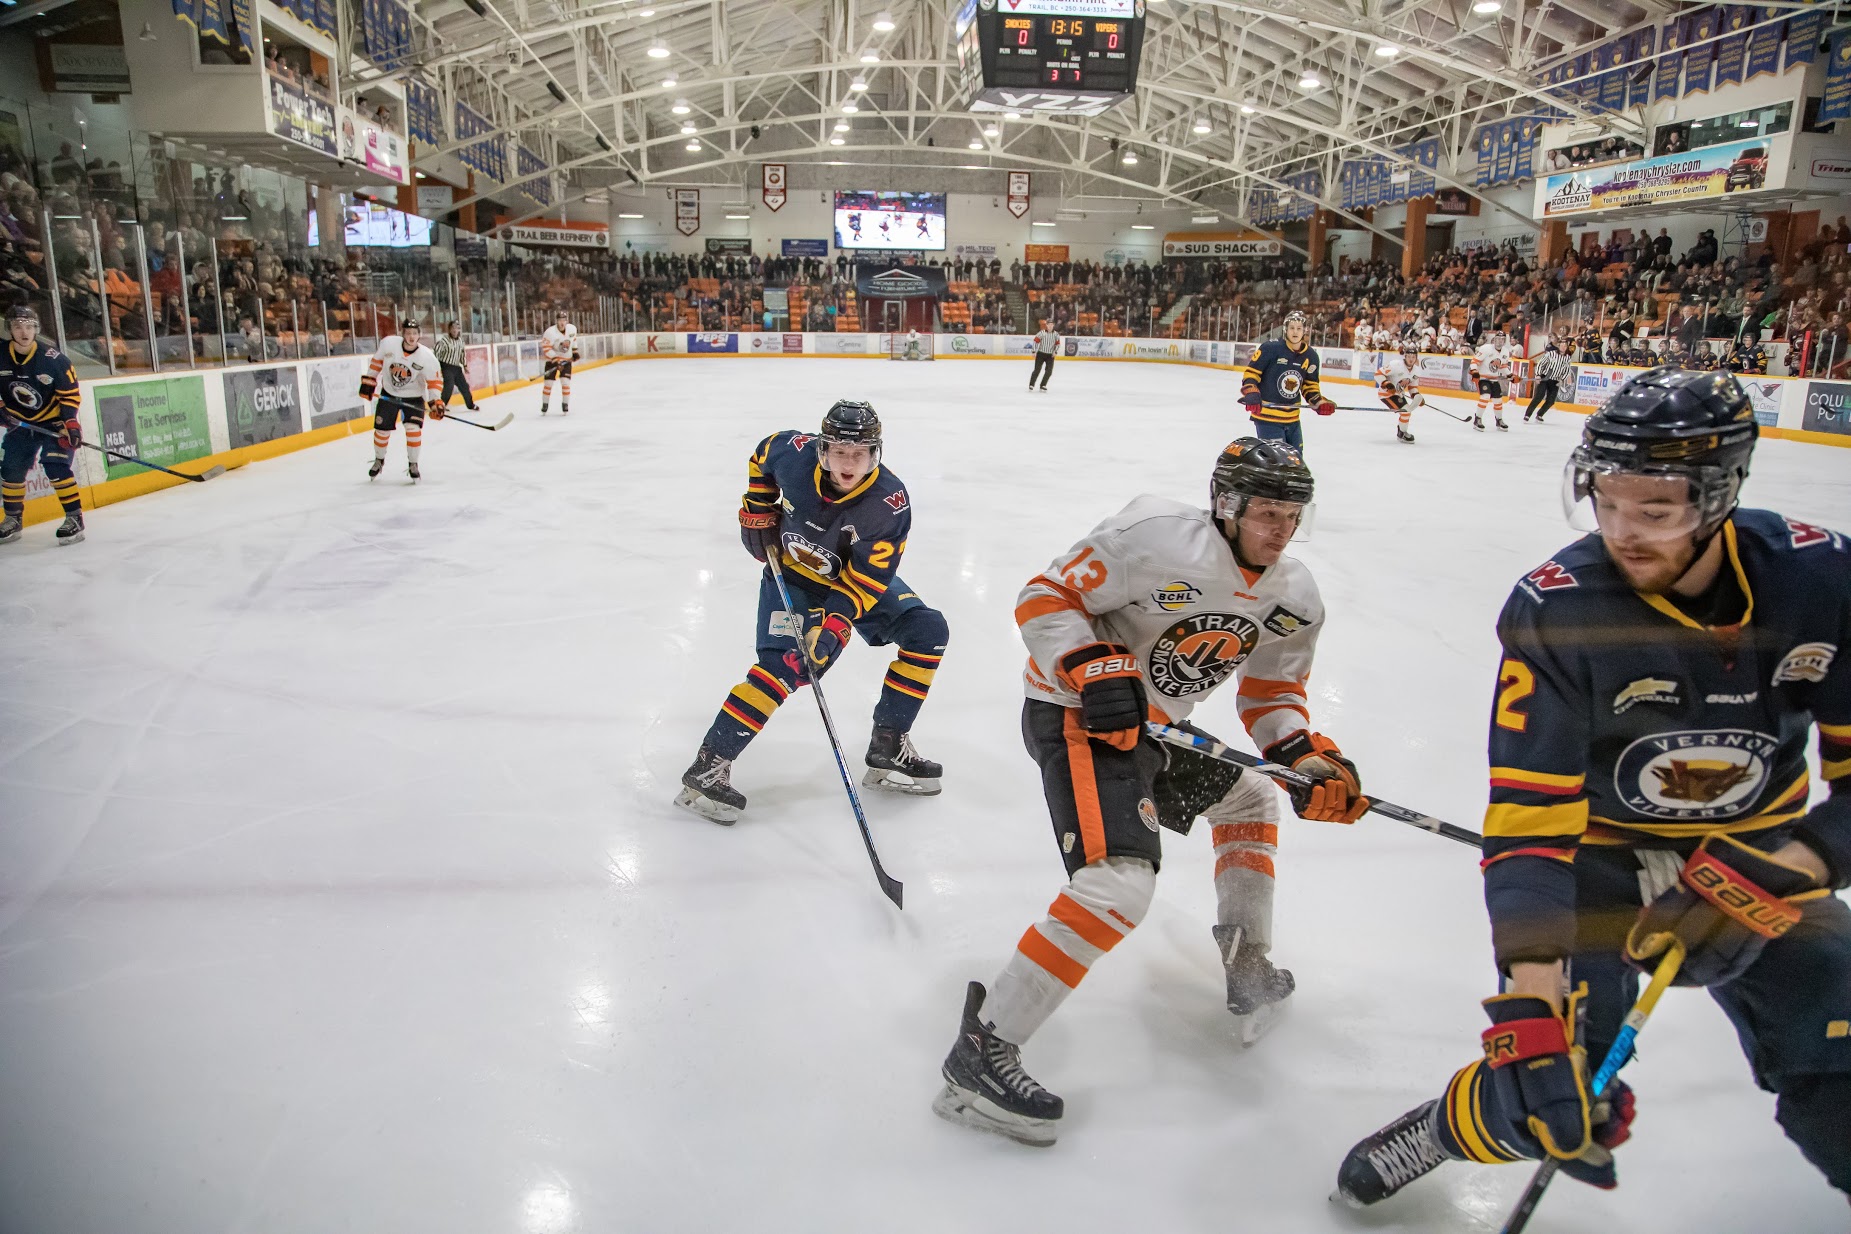 Smoke Eaters Force Game #7 After Staving Off Elimination In 5-2 Victory In Game #6